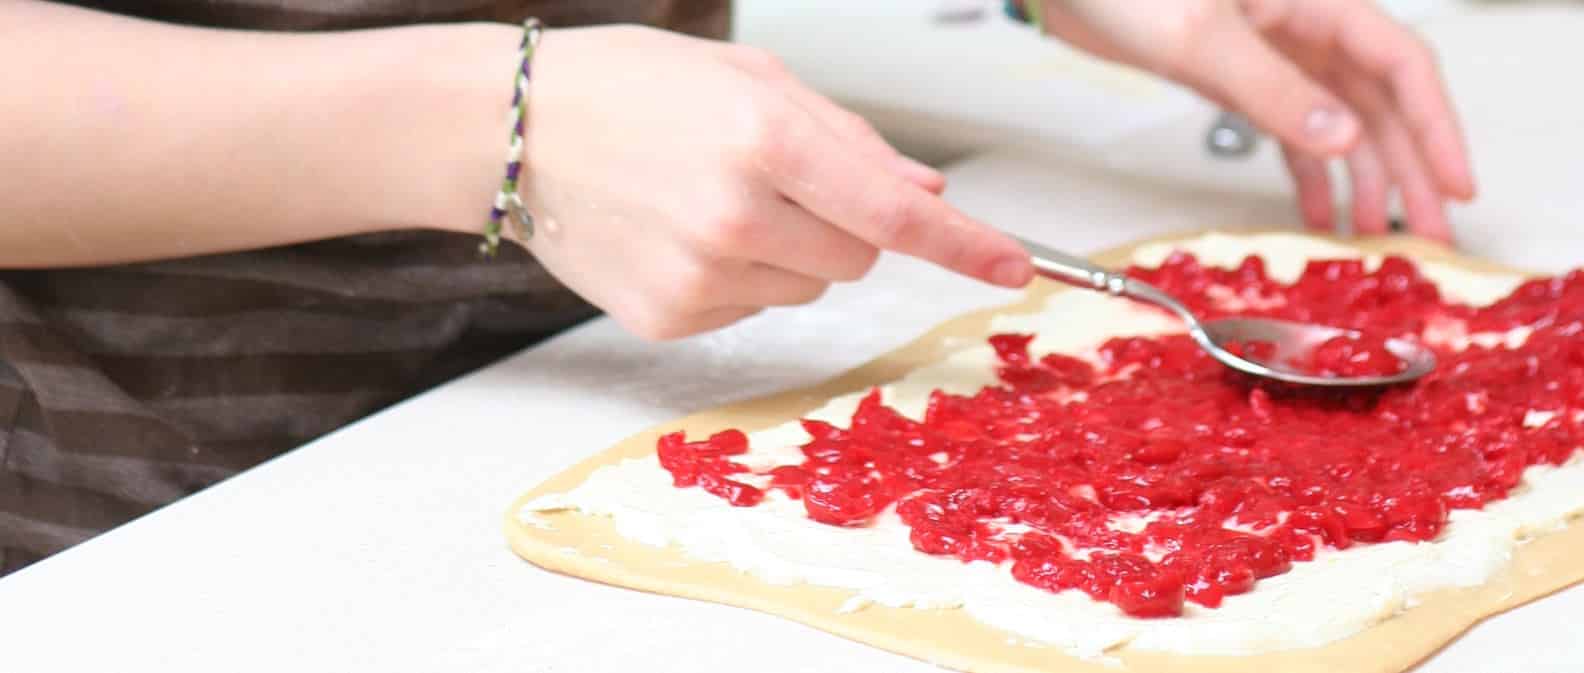 cherries spread over cream cheese filling and dough before rolling and shaping